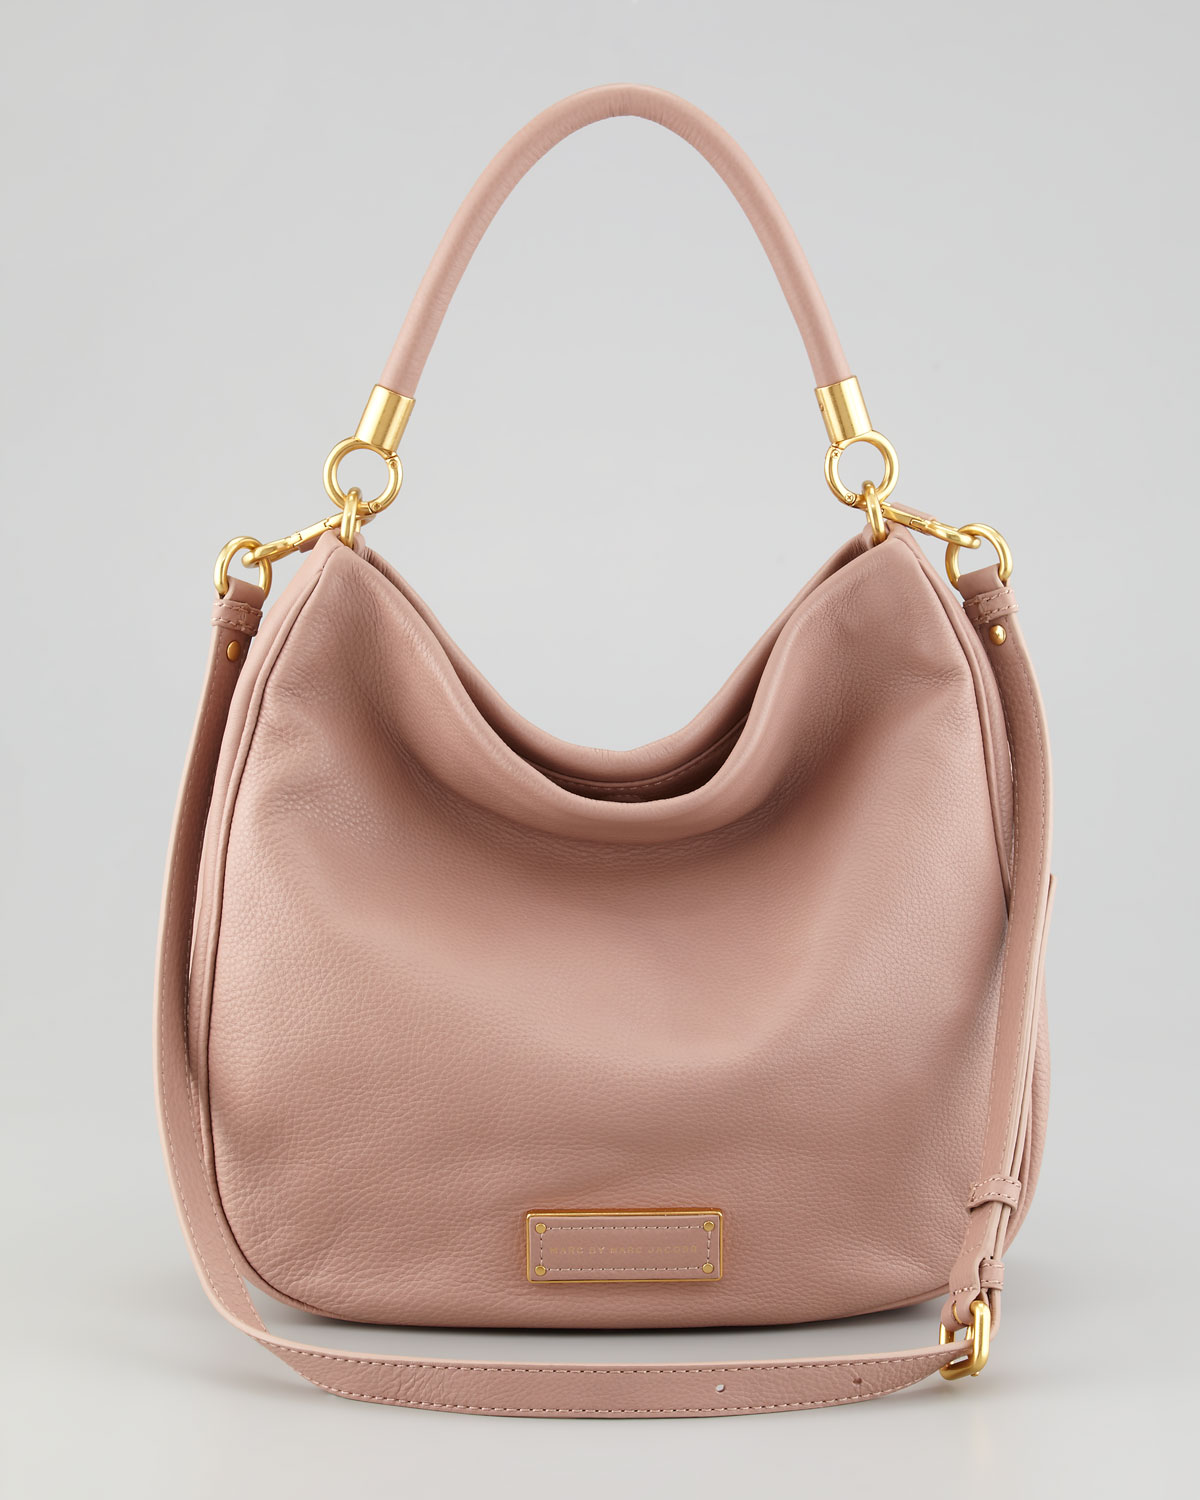 Marc by marc jacobs Hobo Bag in Natural | Lyst